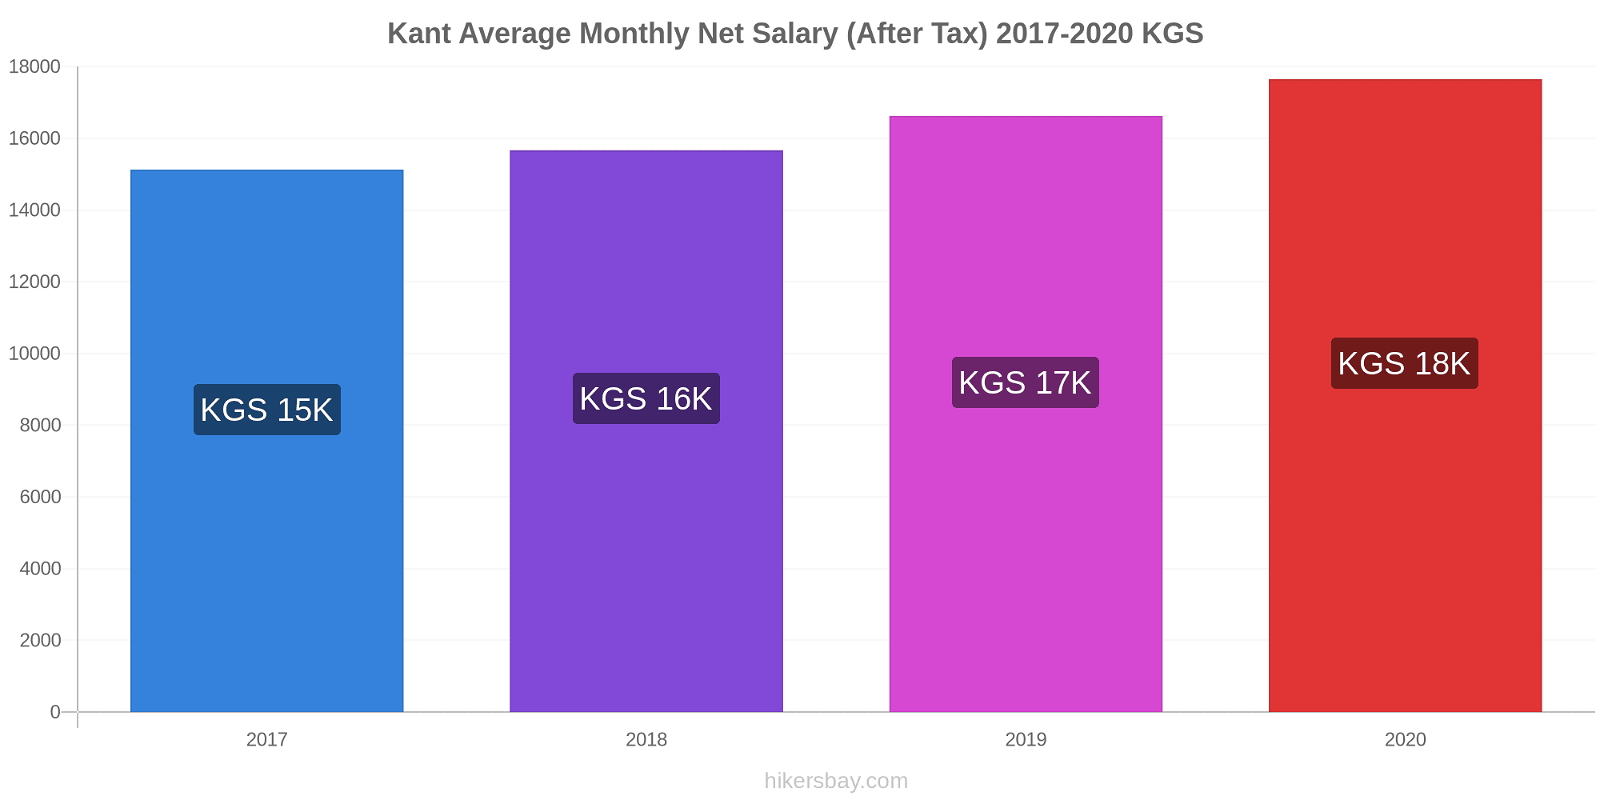 Kant price changes Average Monthly Net Salary (After Tax) hikersbay.com